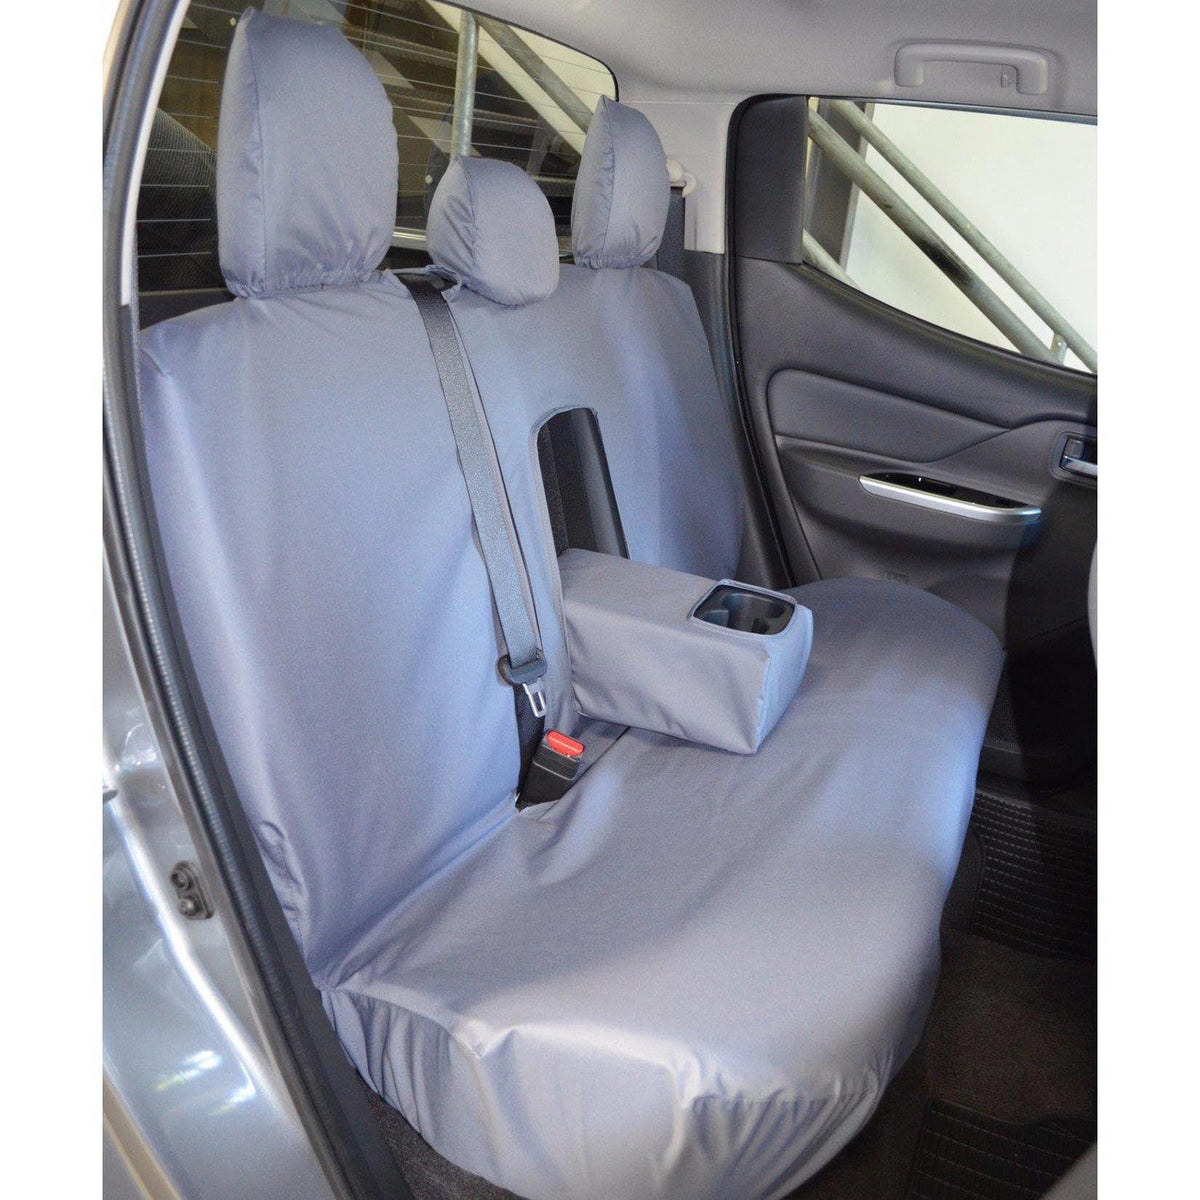 FIAT FULLBACK 2016 ON DOUBLE CAB REAR SEAT COVERS – GREY - Storm Xccessories2